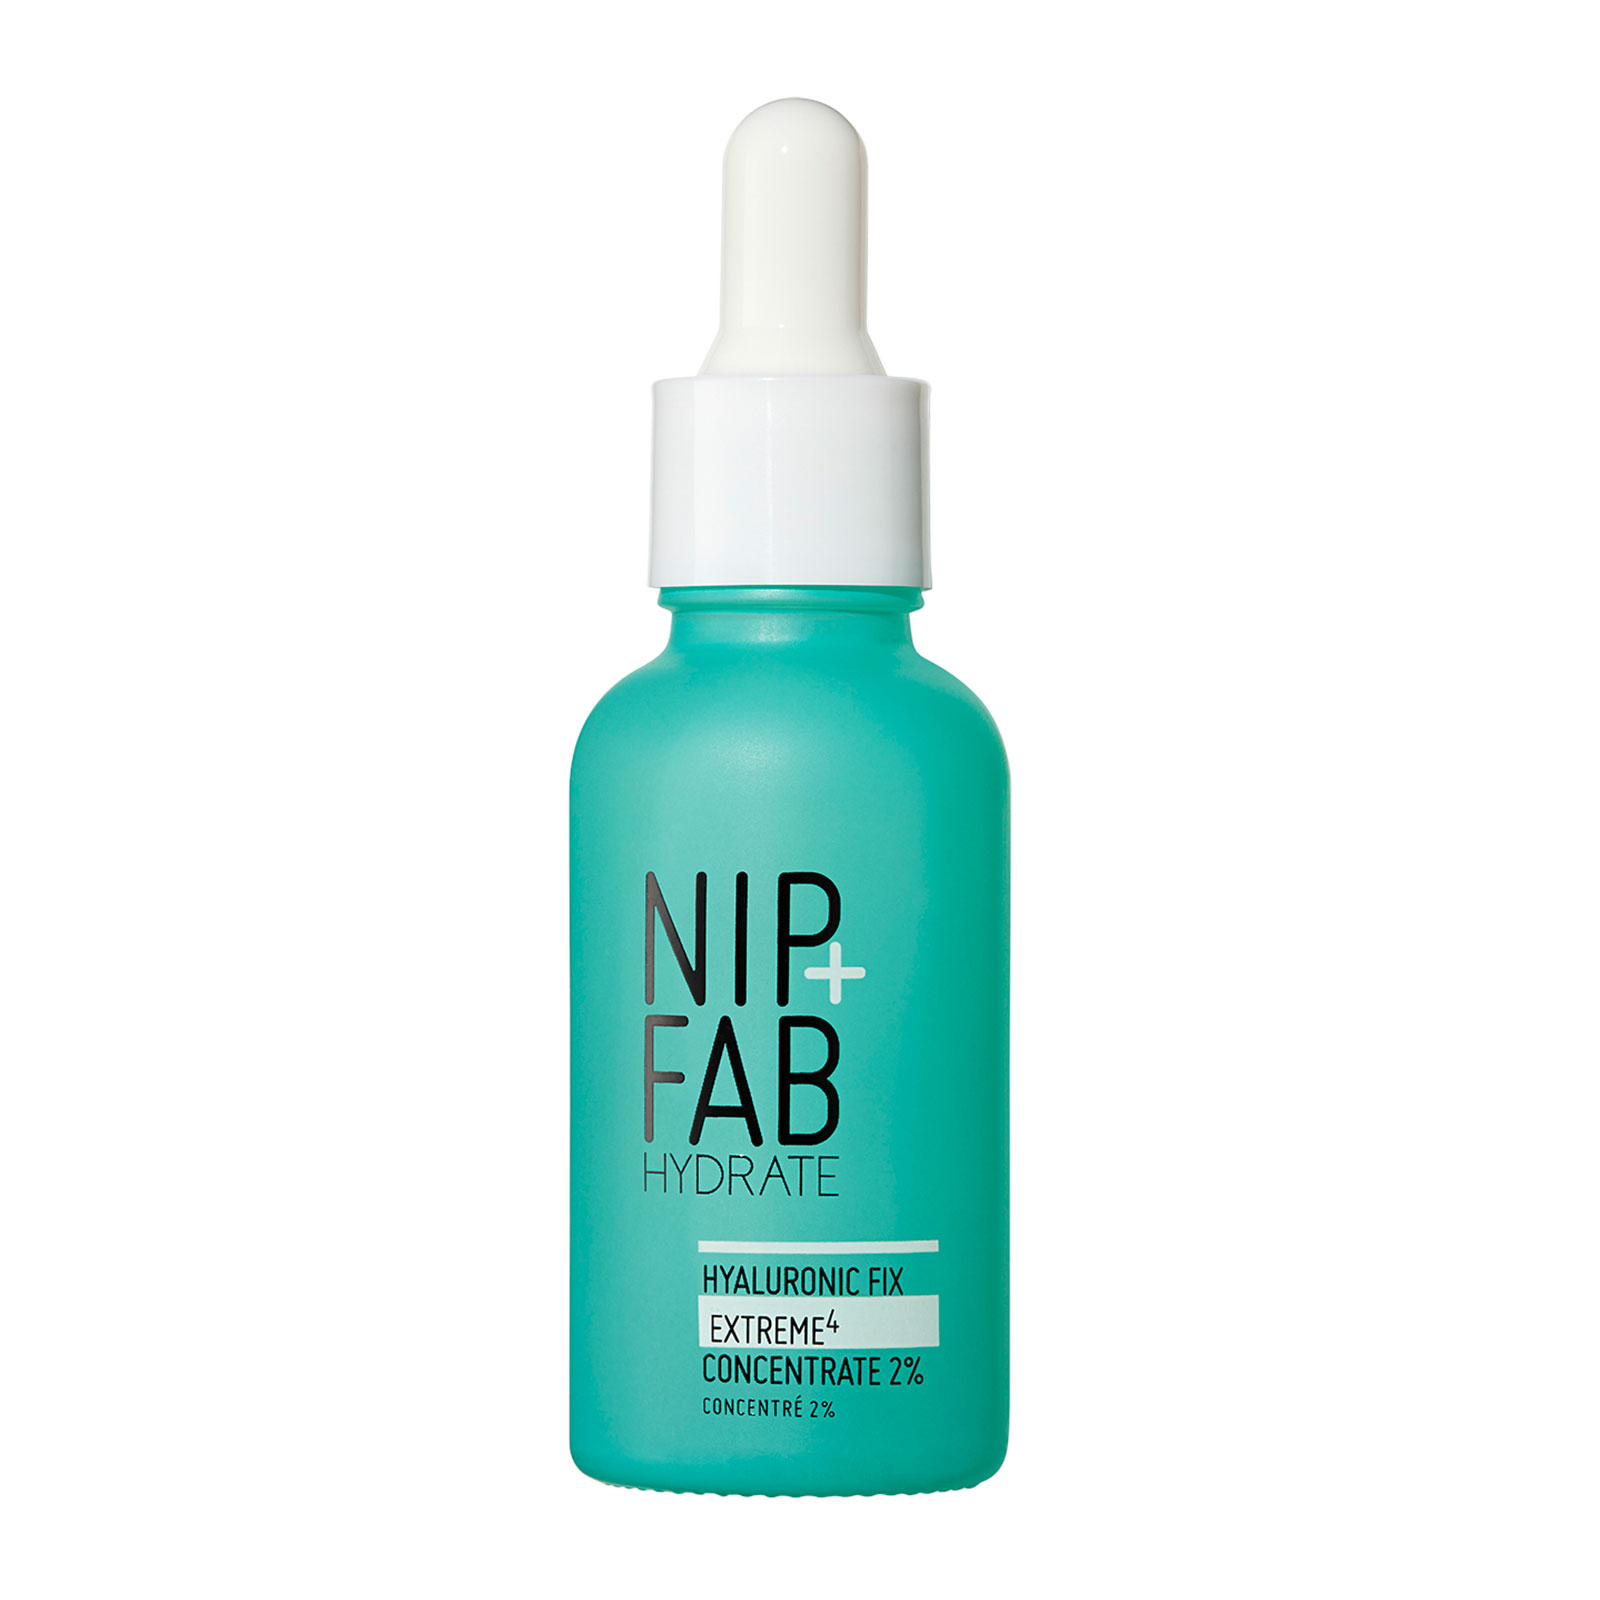 NIP+FAB Hyaluronic Fix Extreme4 2% Hydration Hydration Concentrate 30ml